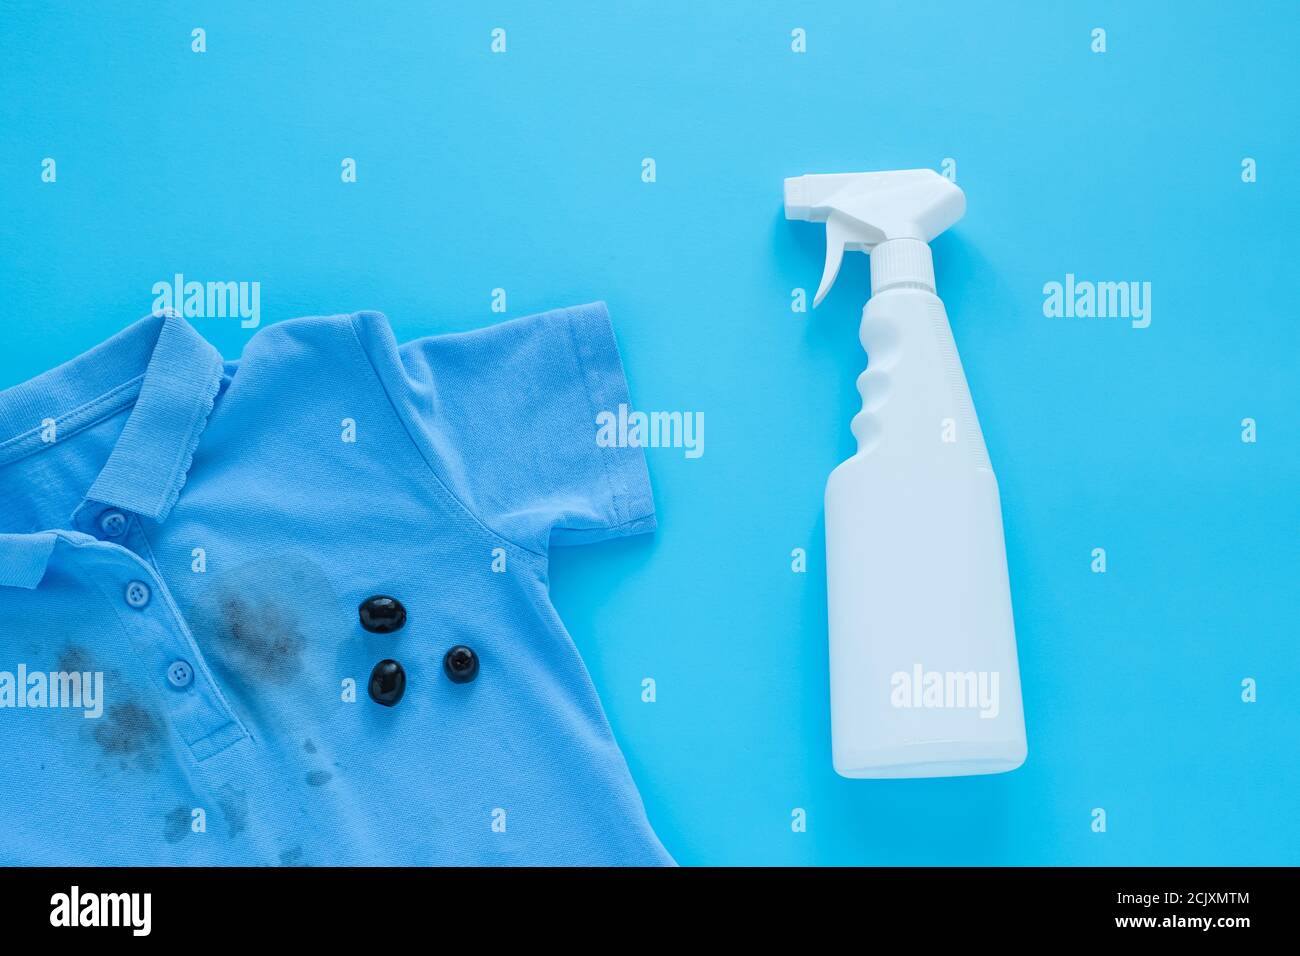 stains of dirty black olives on clothes and stain remover. Stain cleaners. Isolated on a blue background Stock Photo